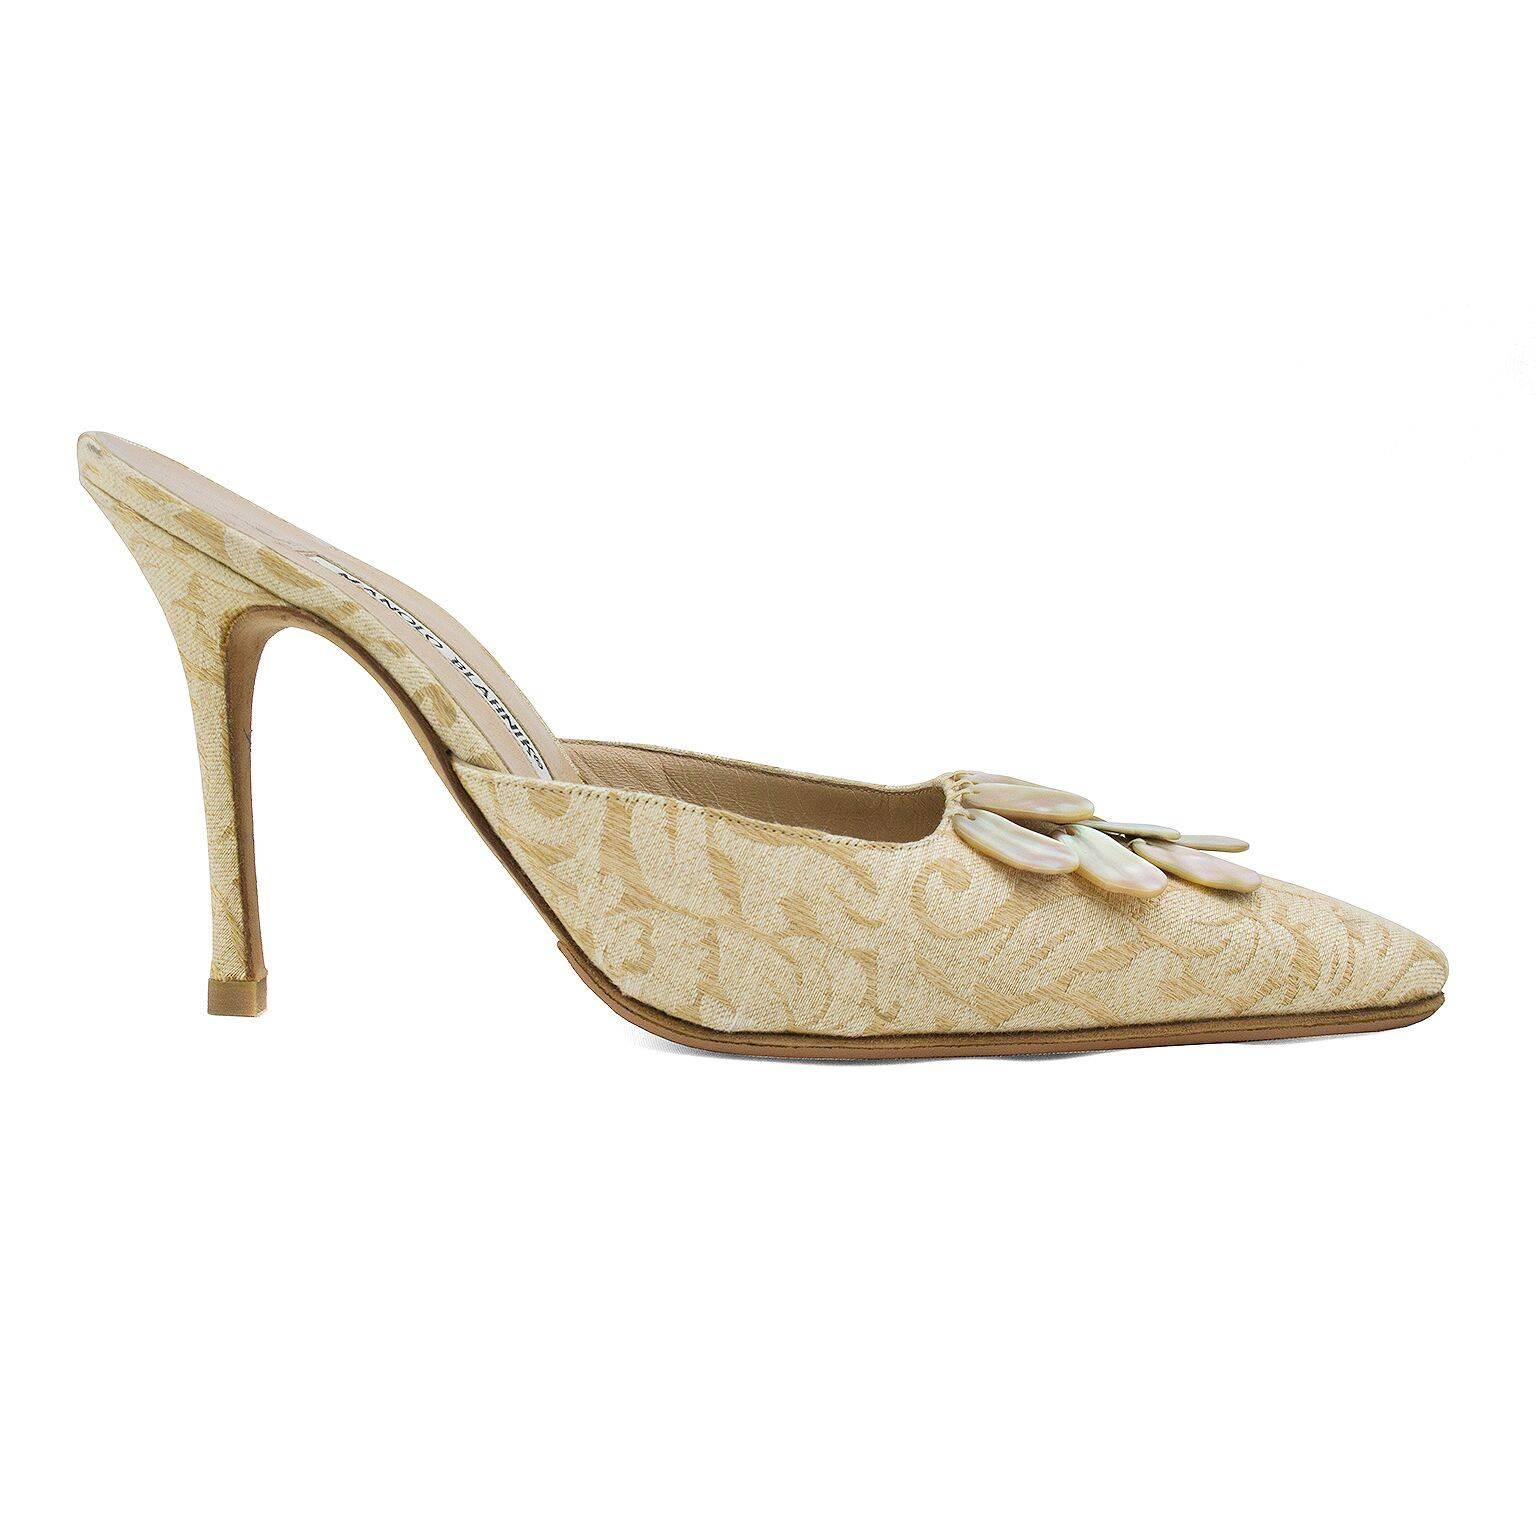 1990s classic Manolo Blahnik heeled mules with a twist. Cream brocade with mother of pearl bead details at toe box. Excellent vintage condition. Very minor wear to interior, exterior as been resoled. Very Carrie Bradshaw. Size 38.5. No box.  